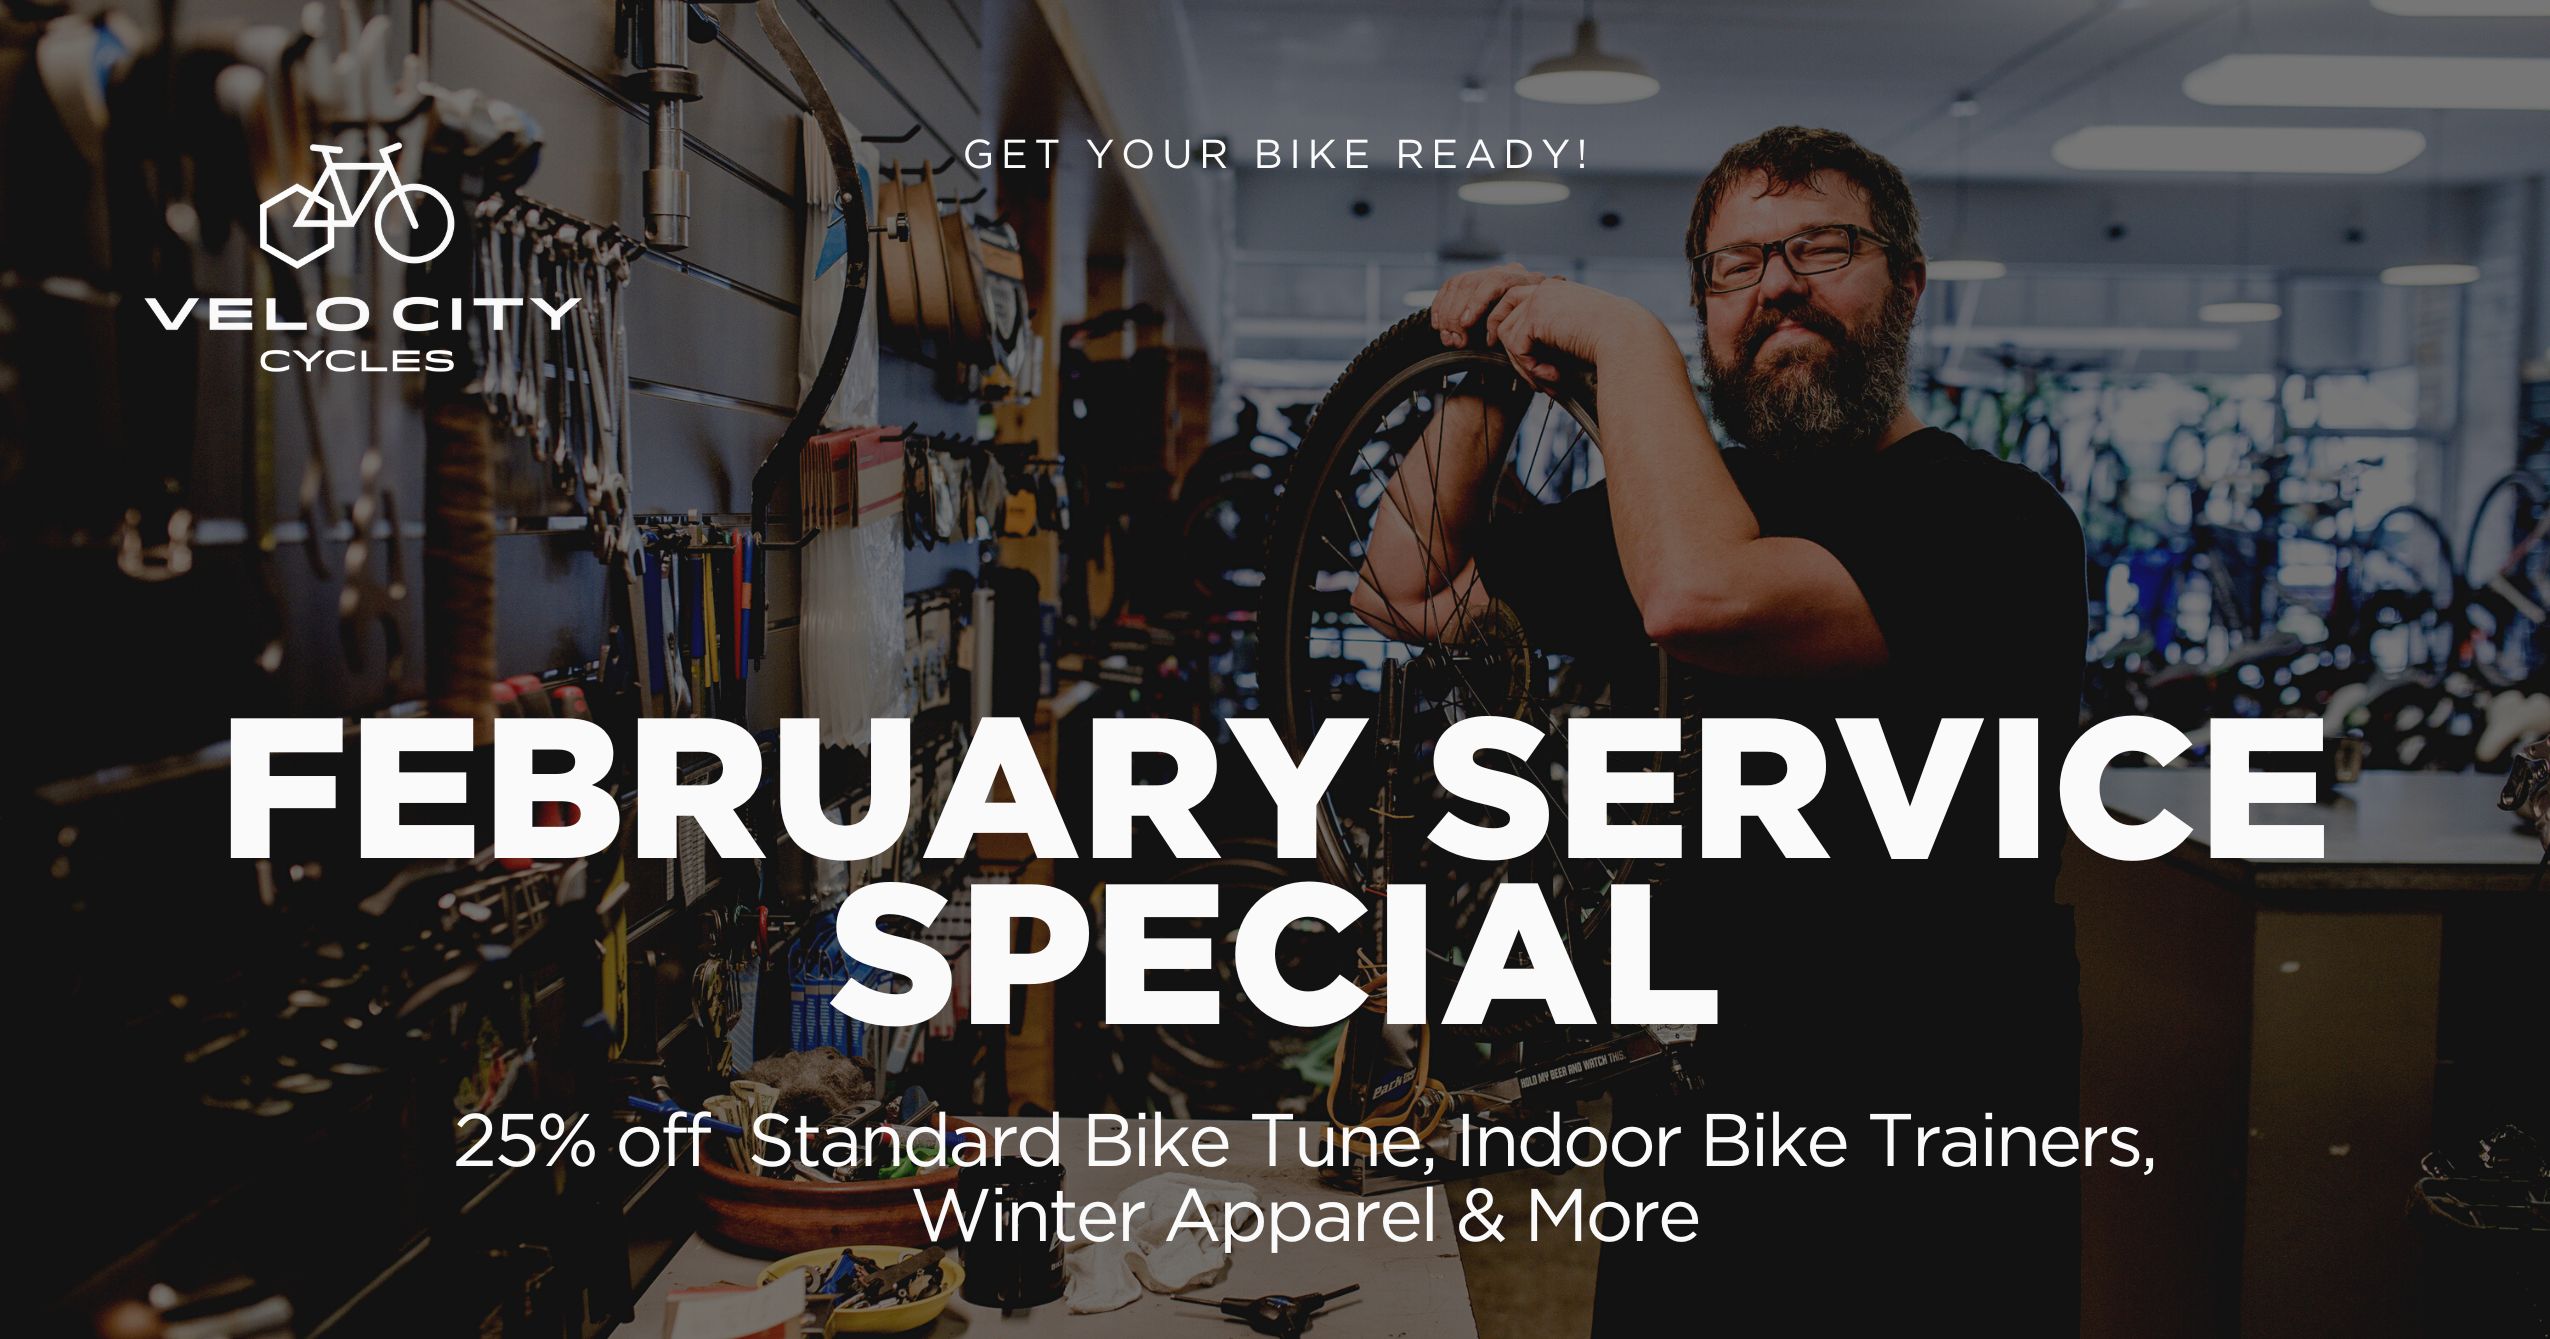 February Service Special, Velo City Cycles